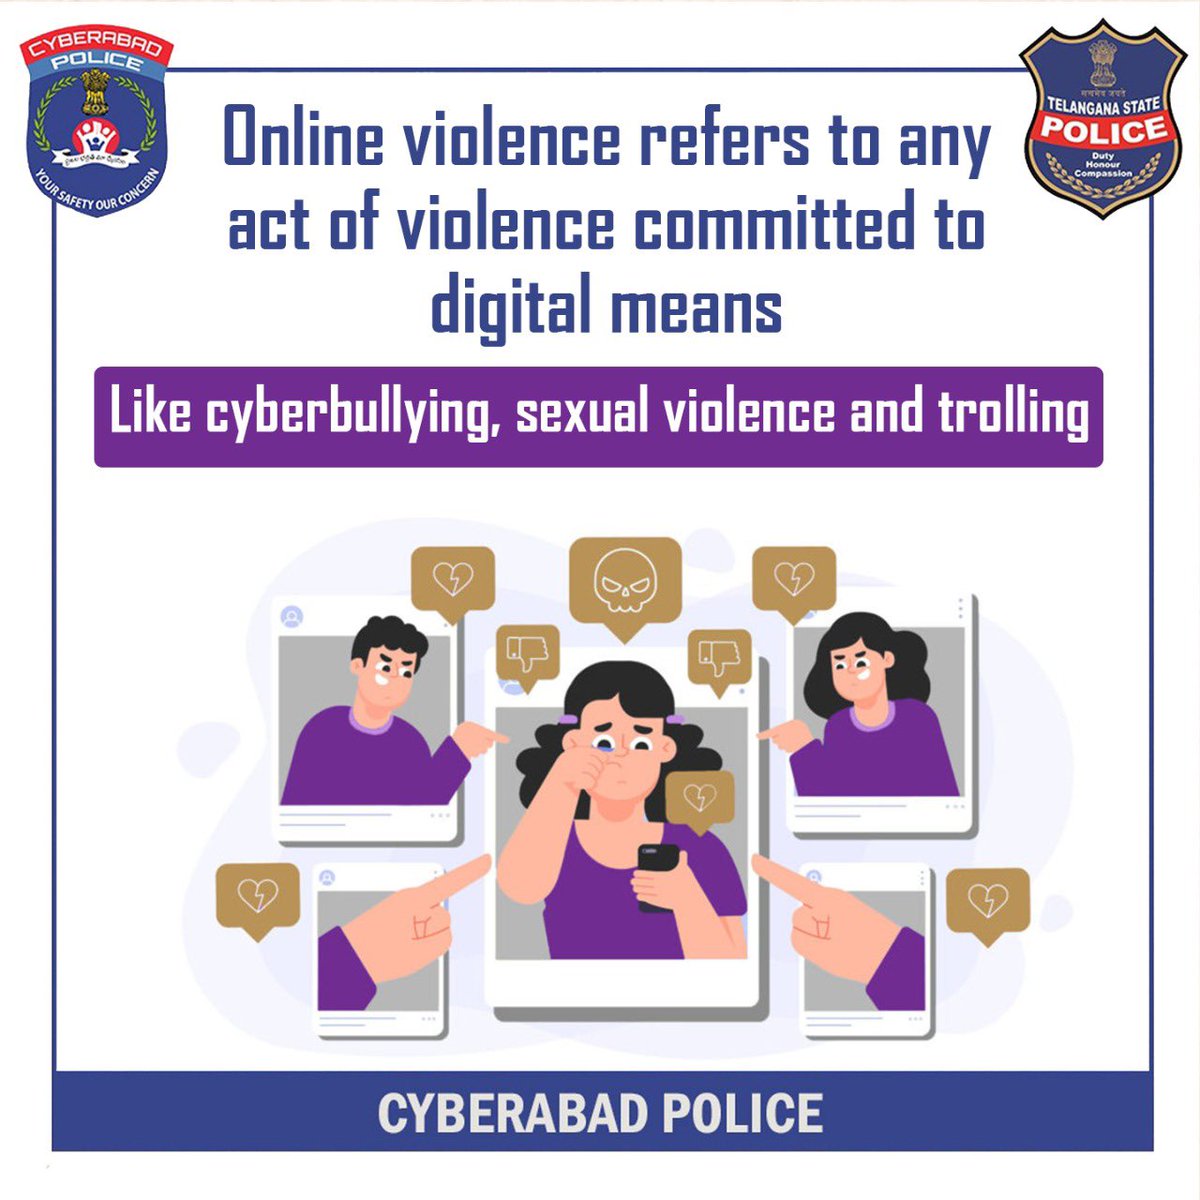 Offline or Online, violence is violence. 

Report on 9490617444 / 181

#OnlineViolence #CyberCrime #WomenAndChildSafety #CyberabadPolice